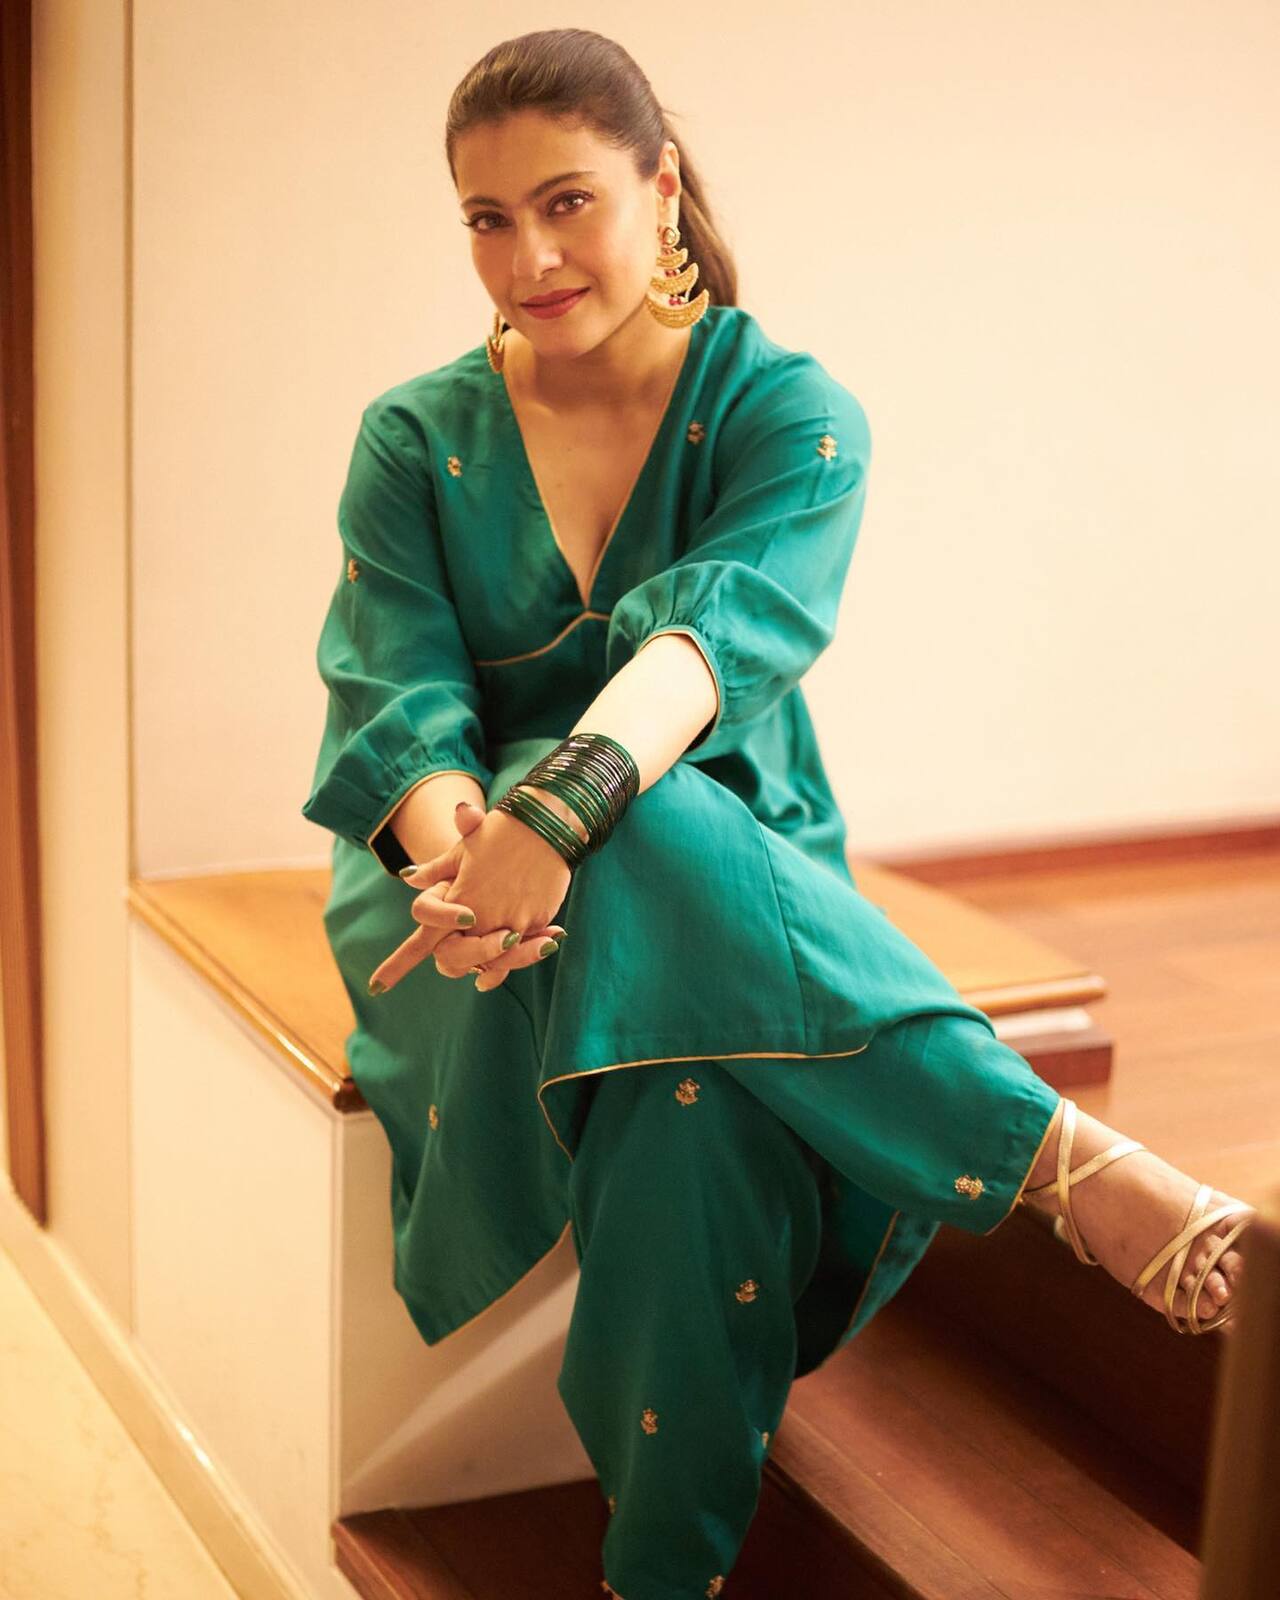 Kajol picked a green salwar with a plunging neckline, quarter sleeves, minimal embroidery work in golden resham threads and embroidered gold borderns.The salwar also featured corset details, and Kajol paired it with matching trousers and gold jewellery. Doesn't she look like a goddess of the forest? With the pictures, the actress wrote, “Which vegetable am I? Can’t make up my mind…Bhindi or Methi?” Well whichever vegetable she may be, she is definitely serving up some style inspiration for Teej!